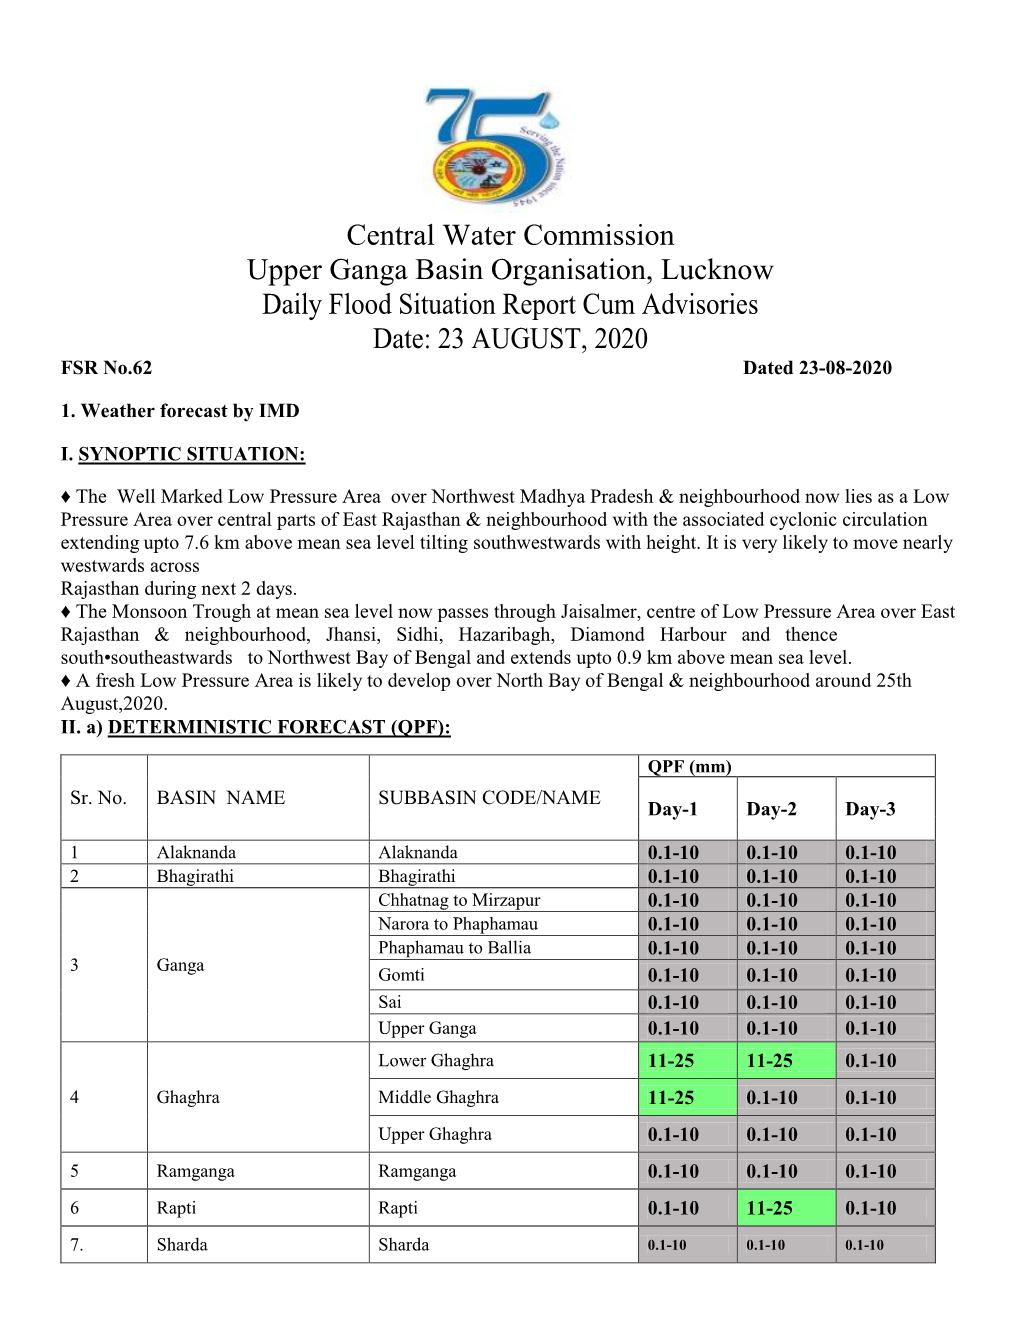 Central Water Commission Upper Ganga Basin Organisation, Lucknow Daily Flood Situation Report Cum Advisories Date: 23 AUGUST, 2020 FSR No.62 Dated 23-08-2020